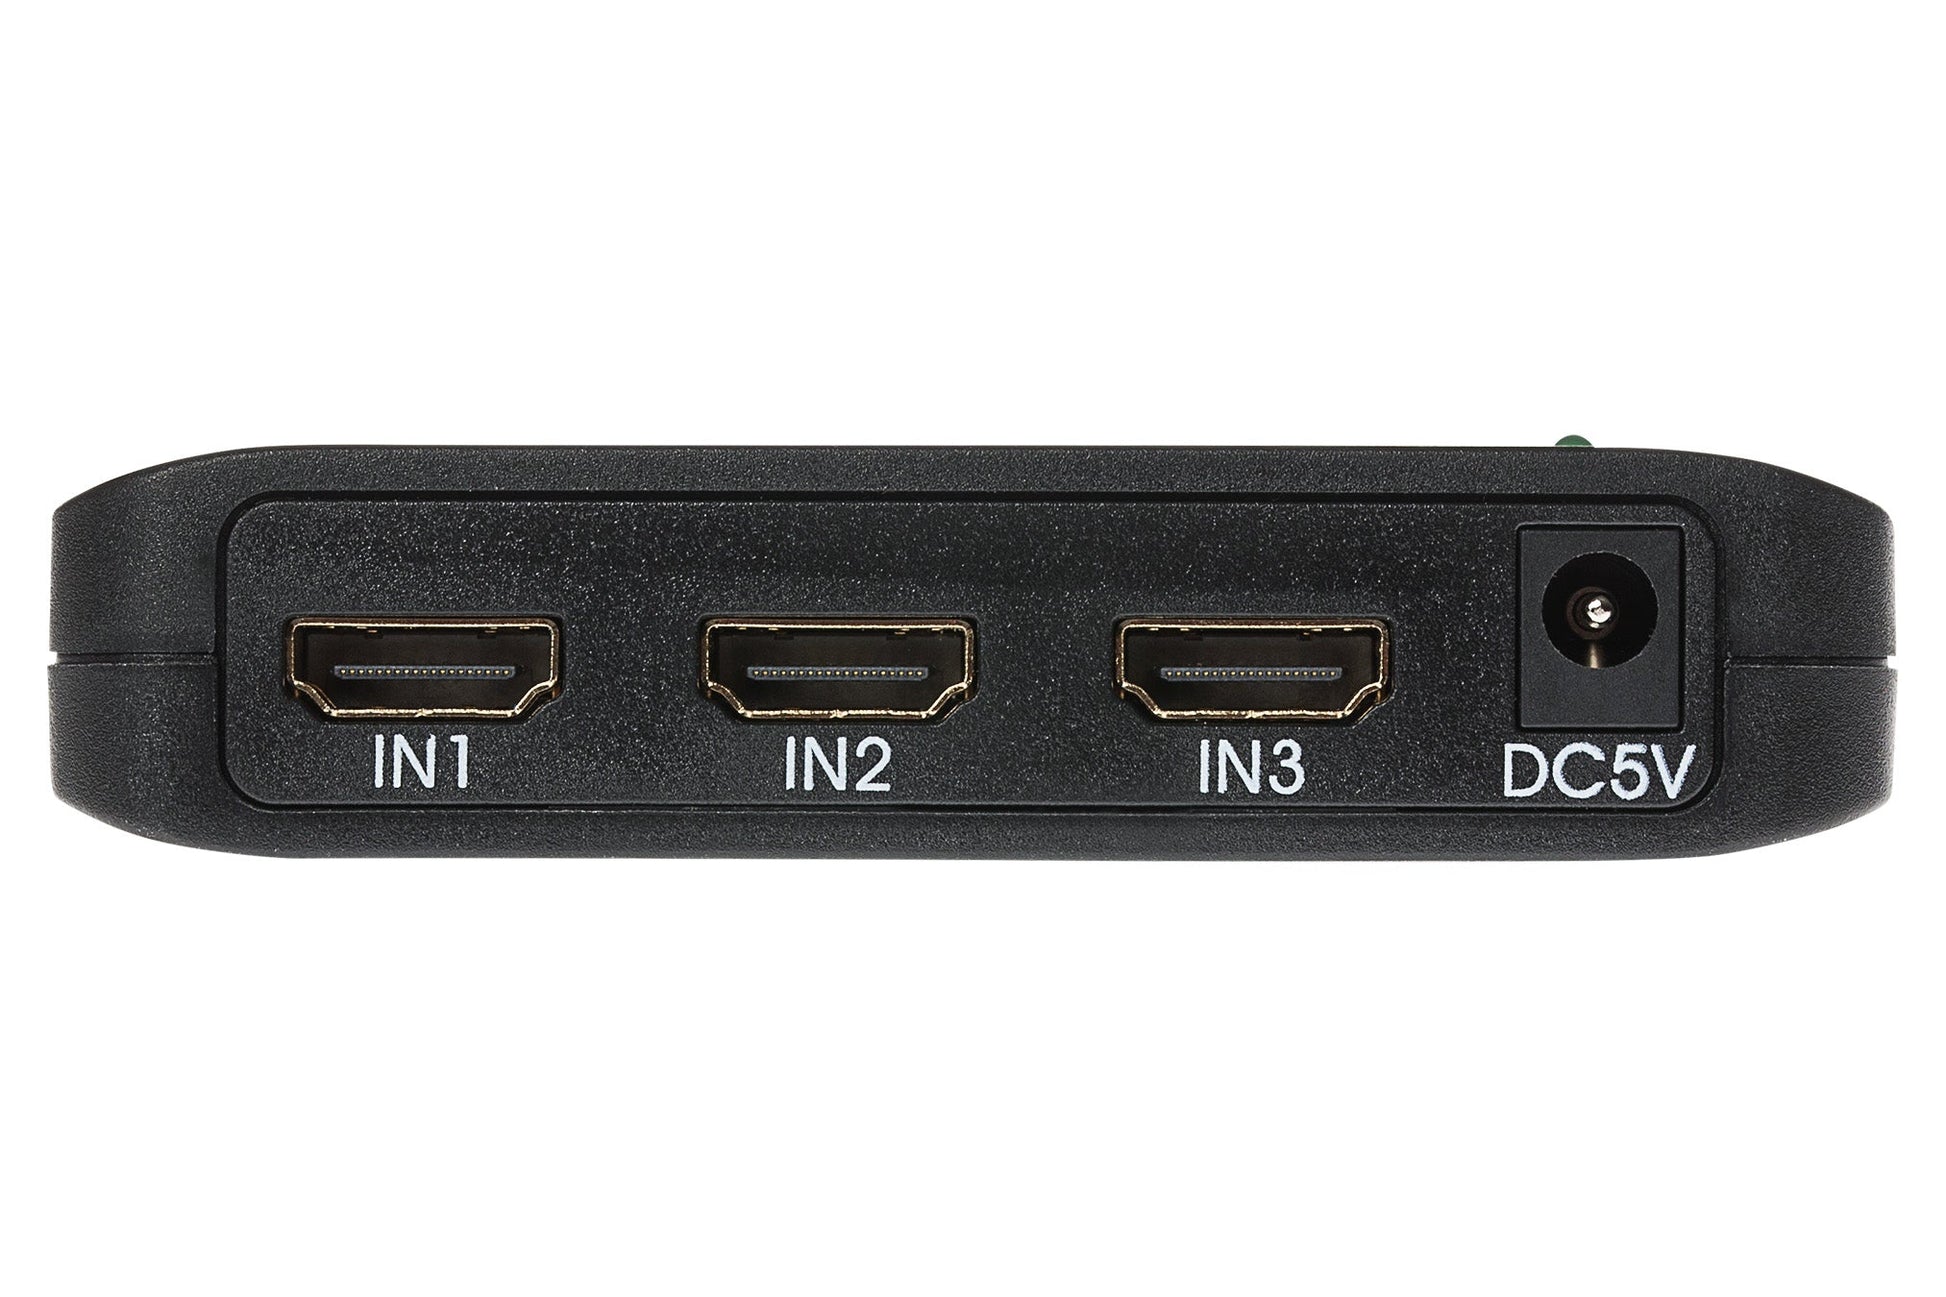 MPS HDMI Switch 3 Ports In 1 Port Out 4K Ultra HD @60Hz with Remote Control - Black - maplin.co.uk